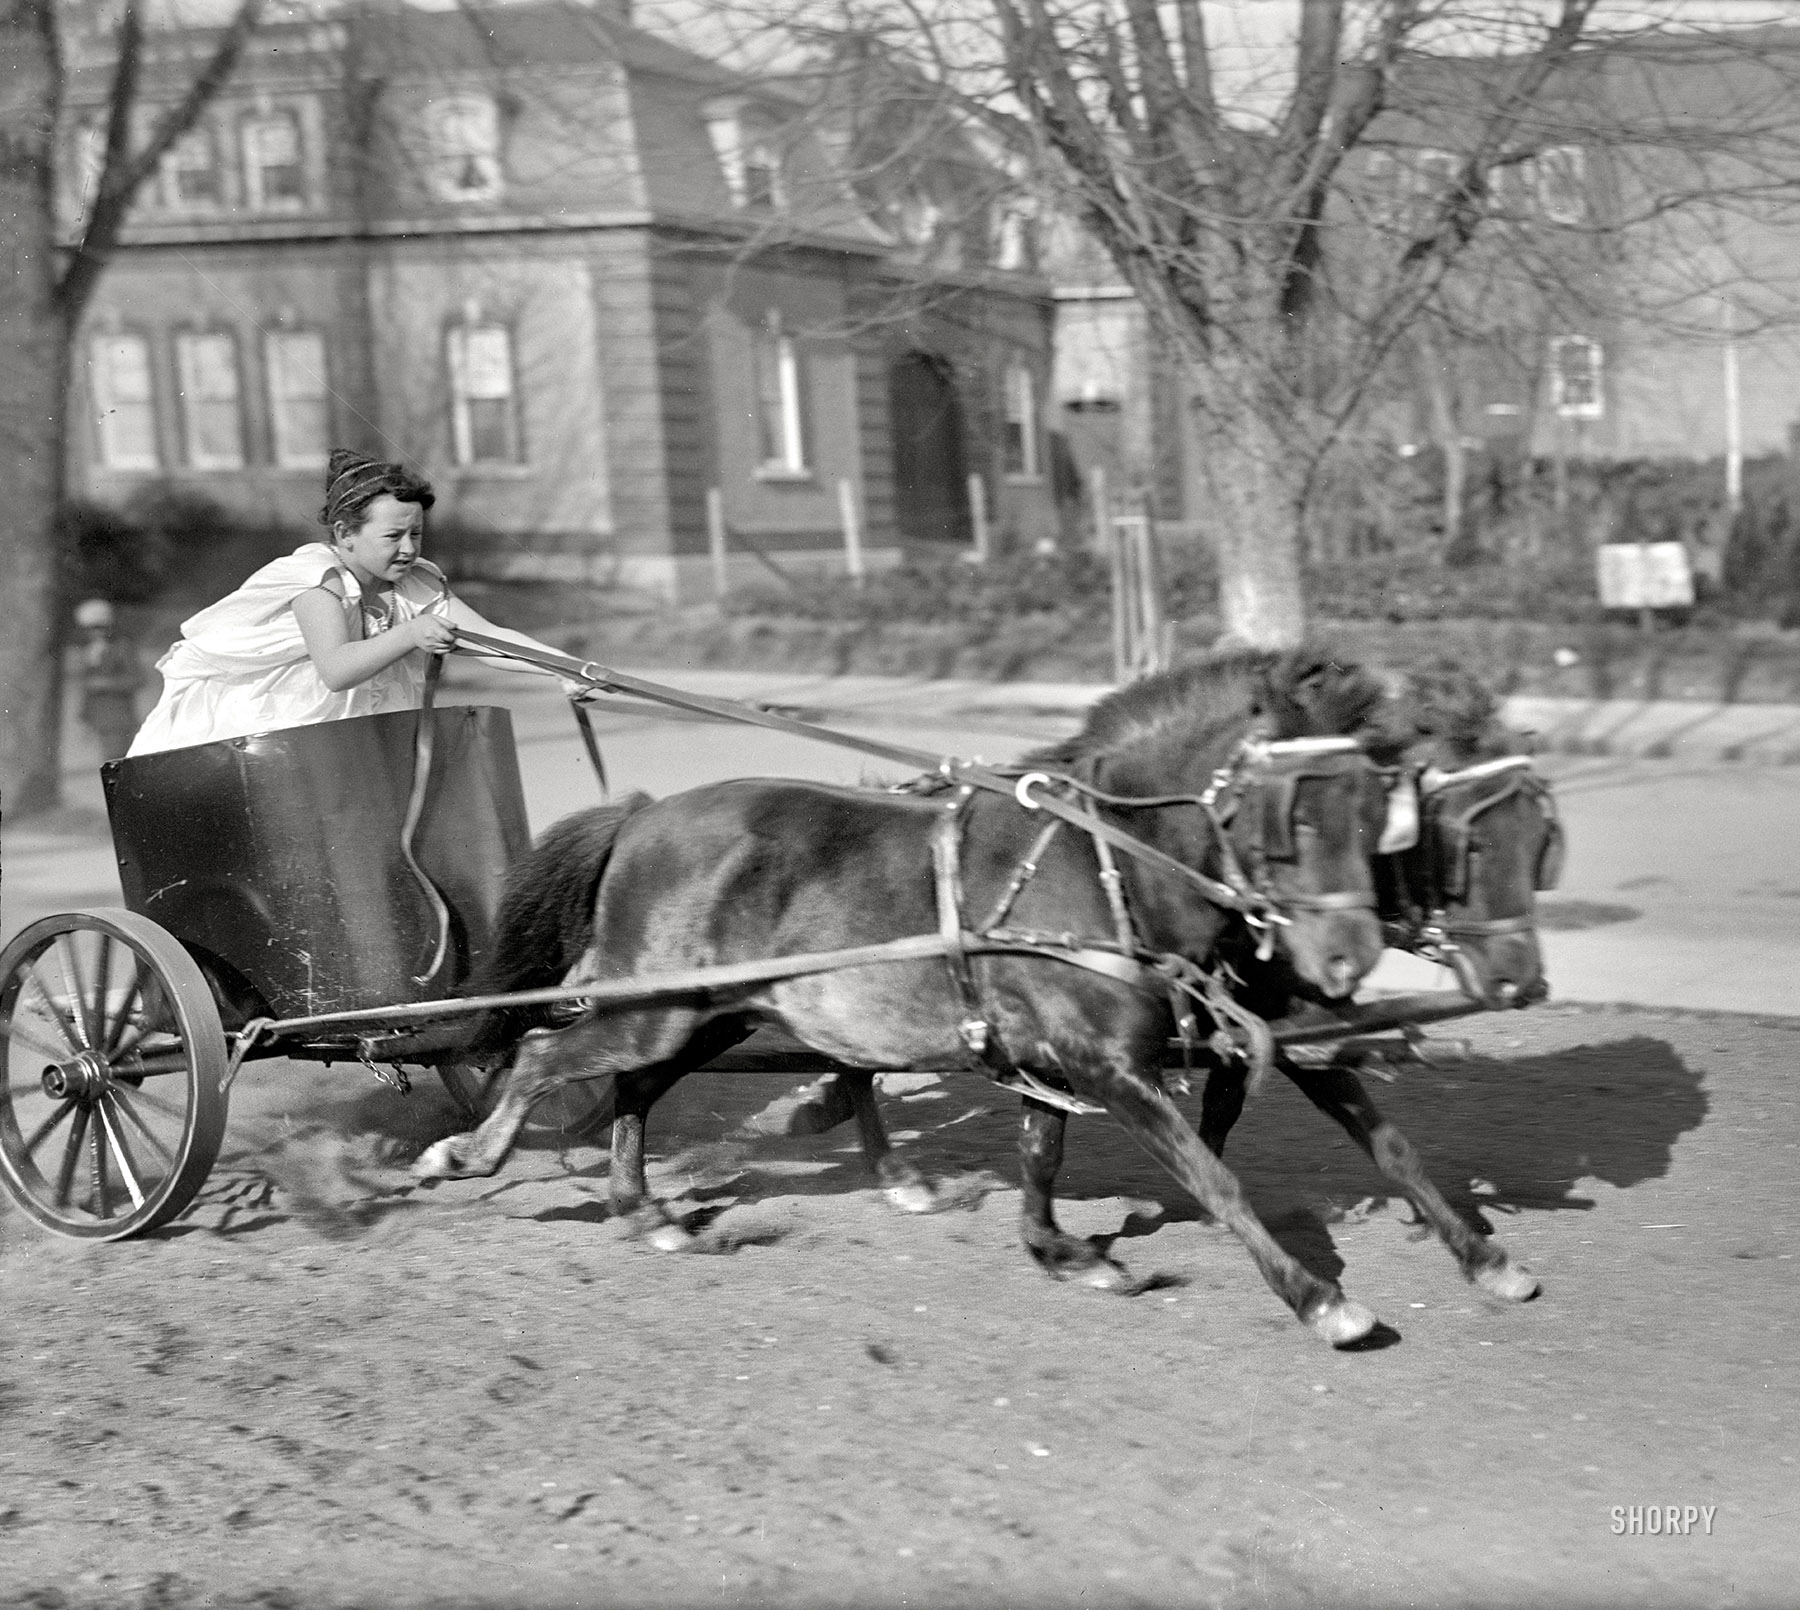 Washington, D.C., circa 1917. "Devereux child in chariot." Late for the toga party. Harris & Ewing Collection glass negative. View full size.